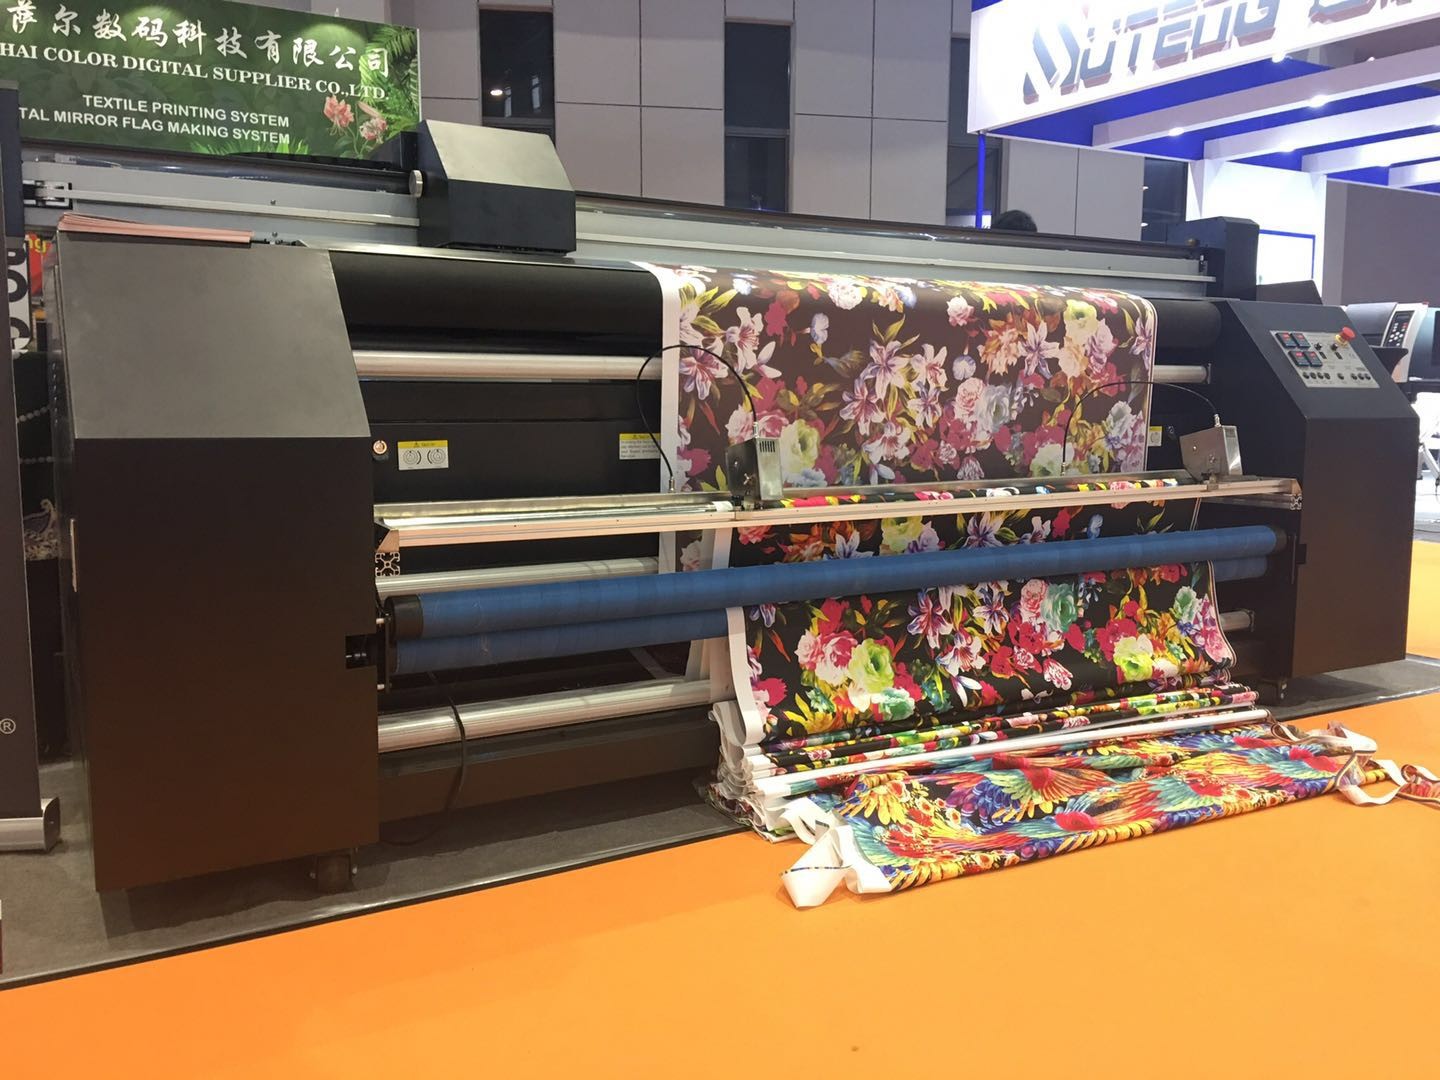  Continous Ink Supply Mode Digital Fabric Printing Machine Manufactures